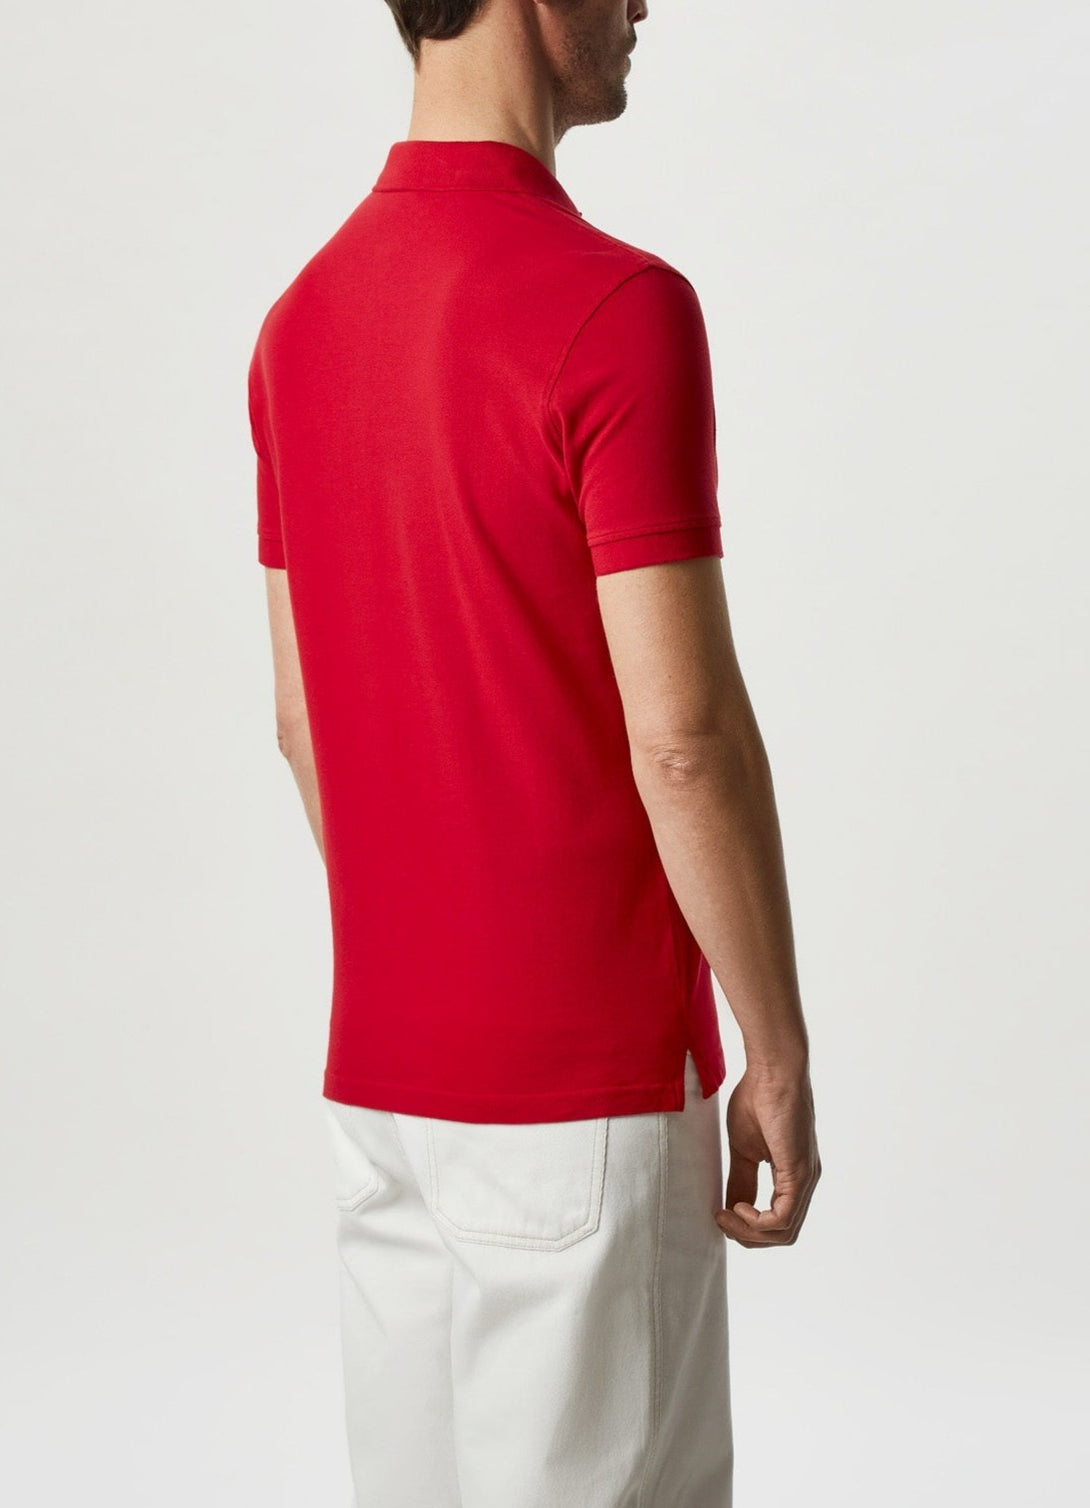 Men Polo | Red Cotton Pique Washed Polo Shirt by Spanish designer Adolfo Dominguez